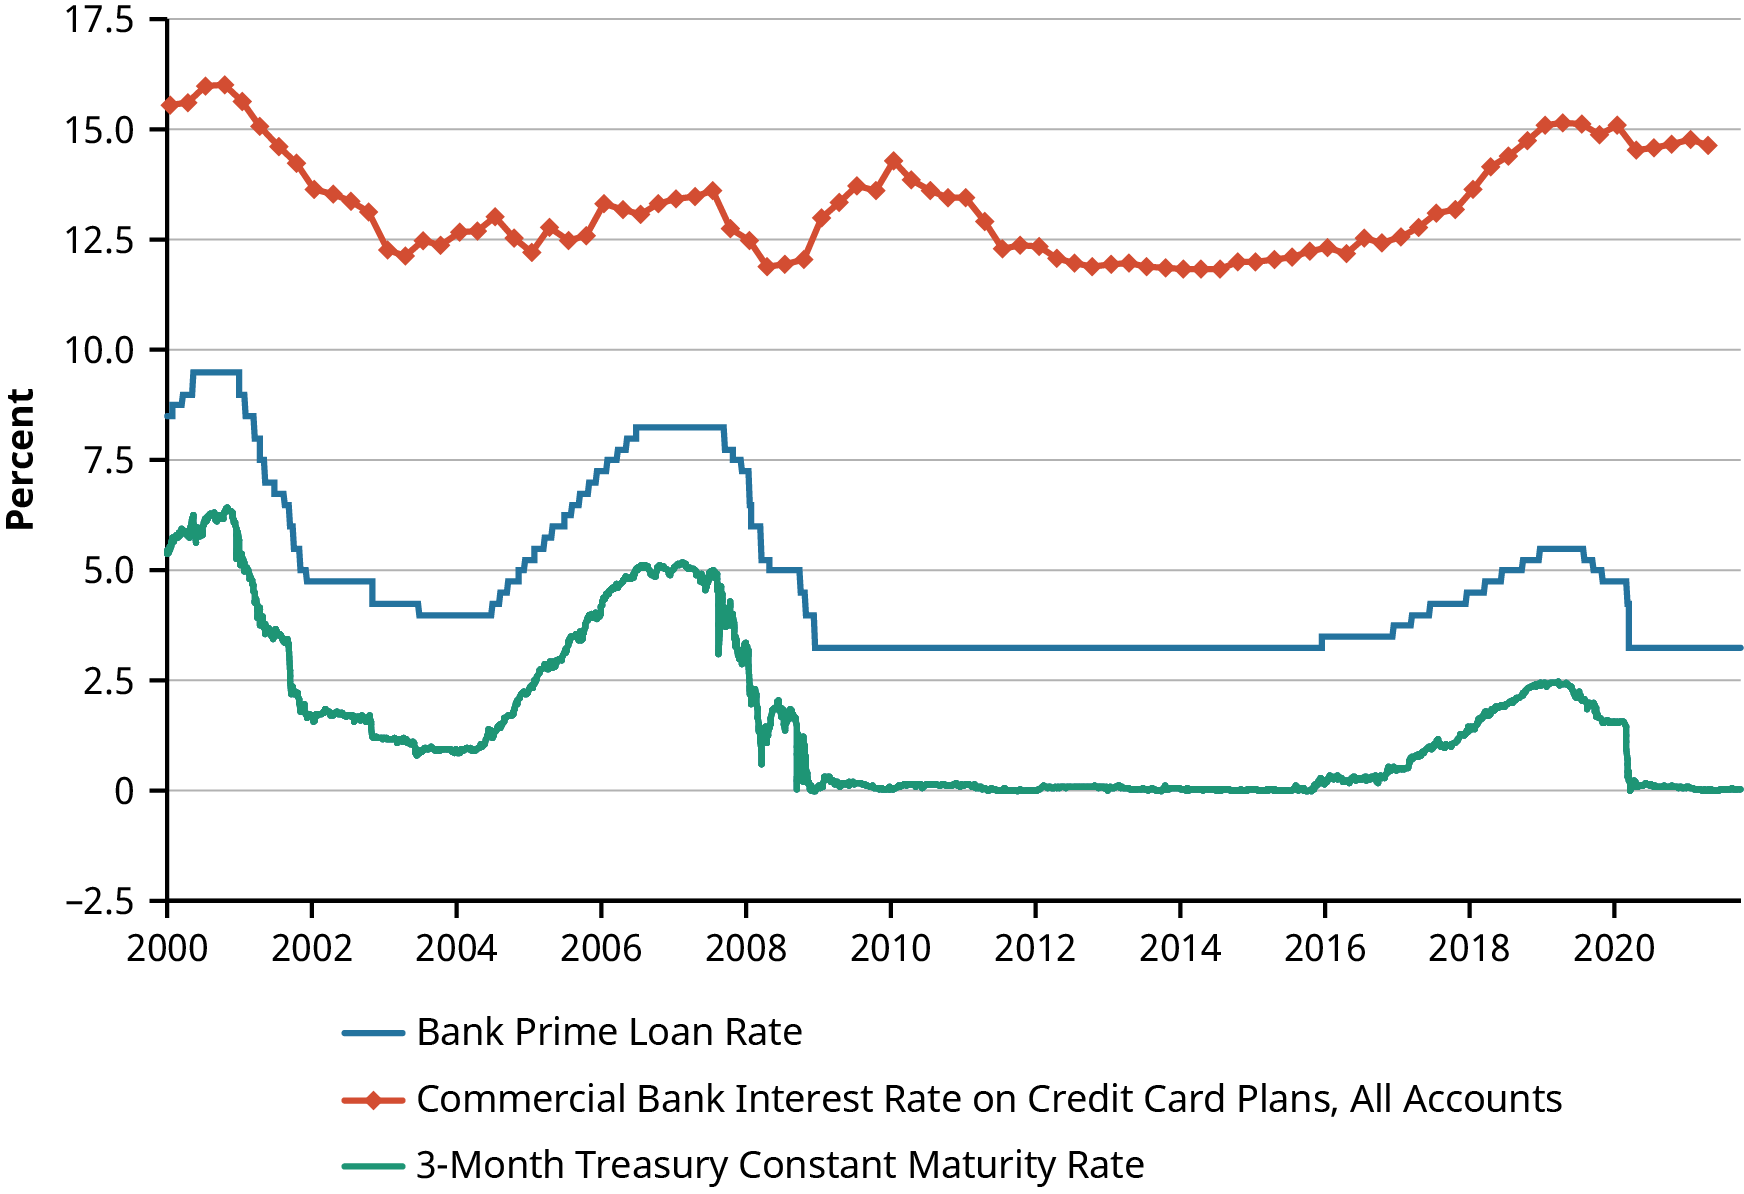 A line graph showsthe Interest Rate on U.S. Treasury Bills, the bank prime loan rate, and Credit Cards. It shows that the interest rate on credit cards is the highest, while the interest rate on 3-month treasury constant maturity rate is the lowest. The Bank Prime Loan Rate is in the middle of these two rates. The three rates rise and fall during the same time periods, although the credit card rate is always significantly higher than the other two rates.